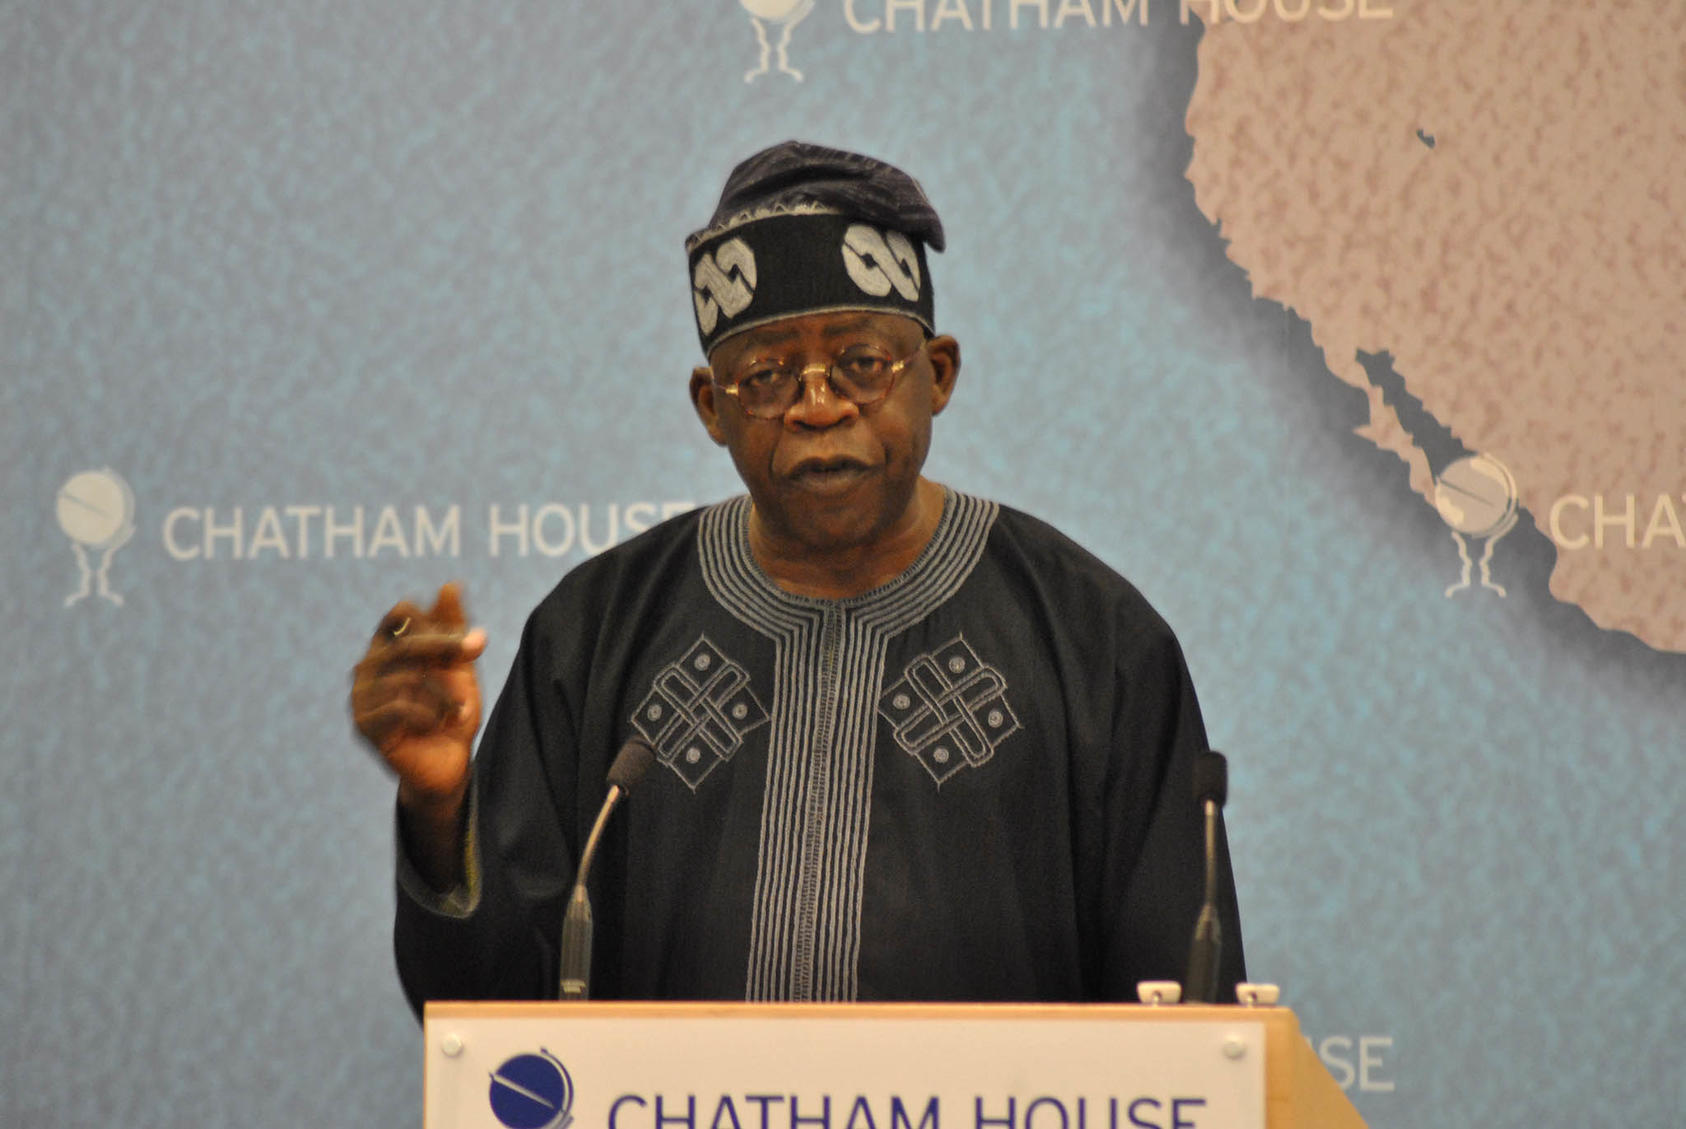 Nigeria’s President Bola Tinubu, shown in a 2011 address in London, chaired a summit of the ECOWAS regional group that reiterated its demand for Niger’s junta to restore that country’s elected civilian president to office. (Chatham House/CC license 2.0) 